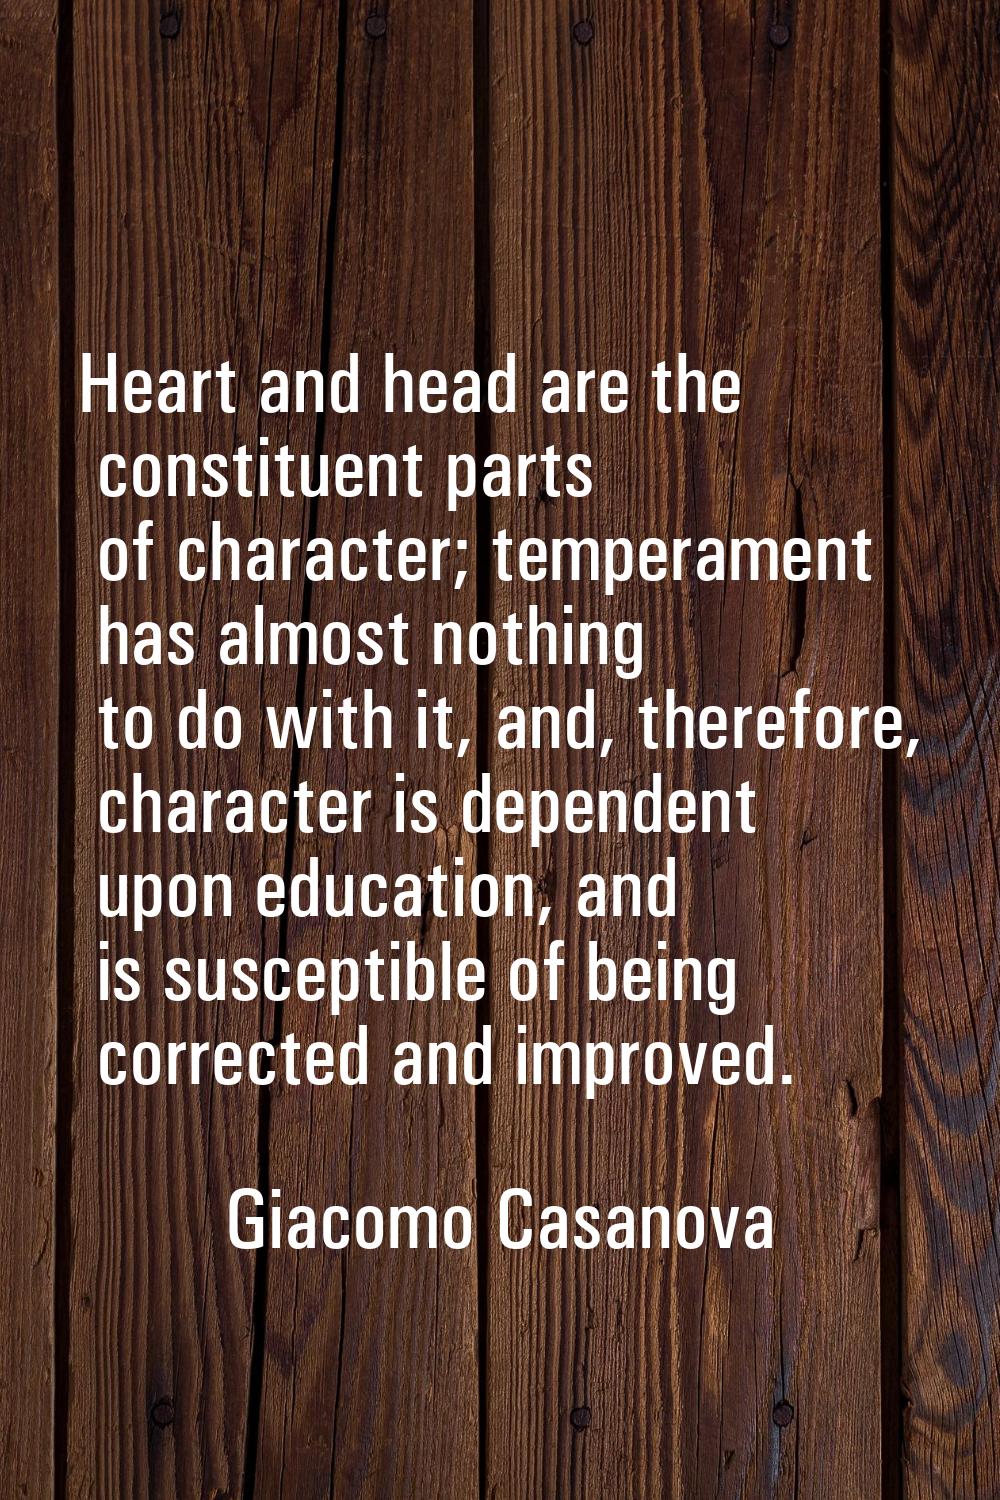 Heart and head are the constituent parts of character; temperament has almost nothing to do with it